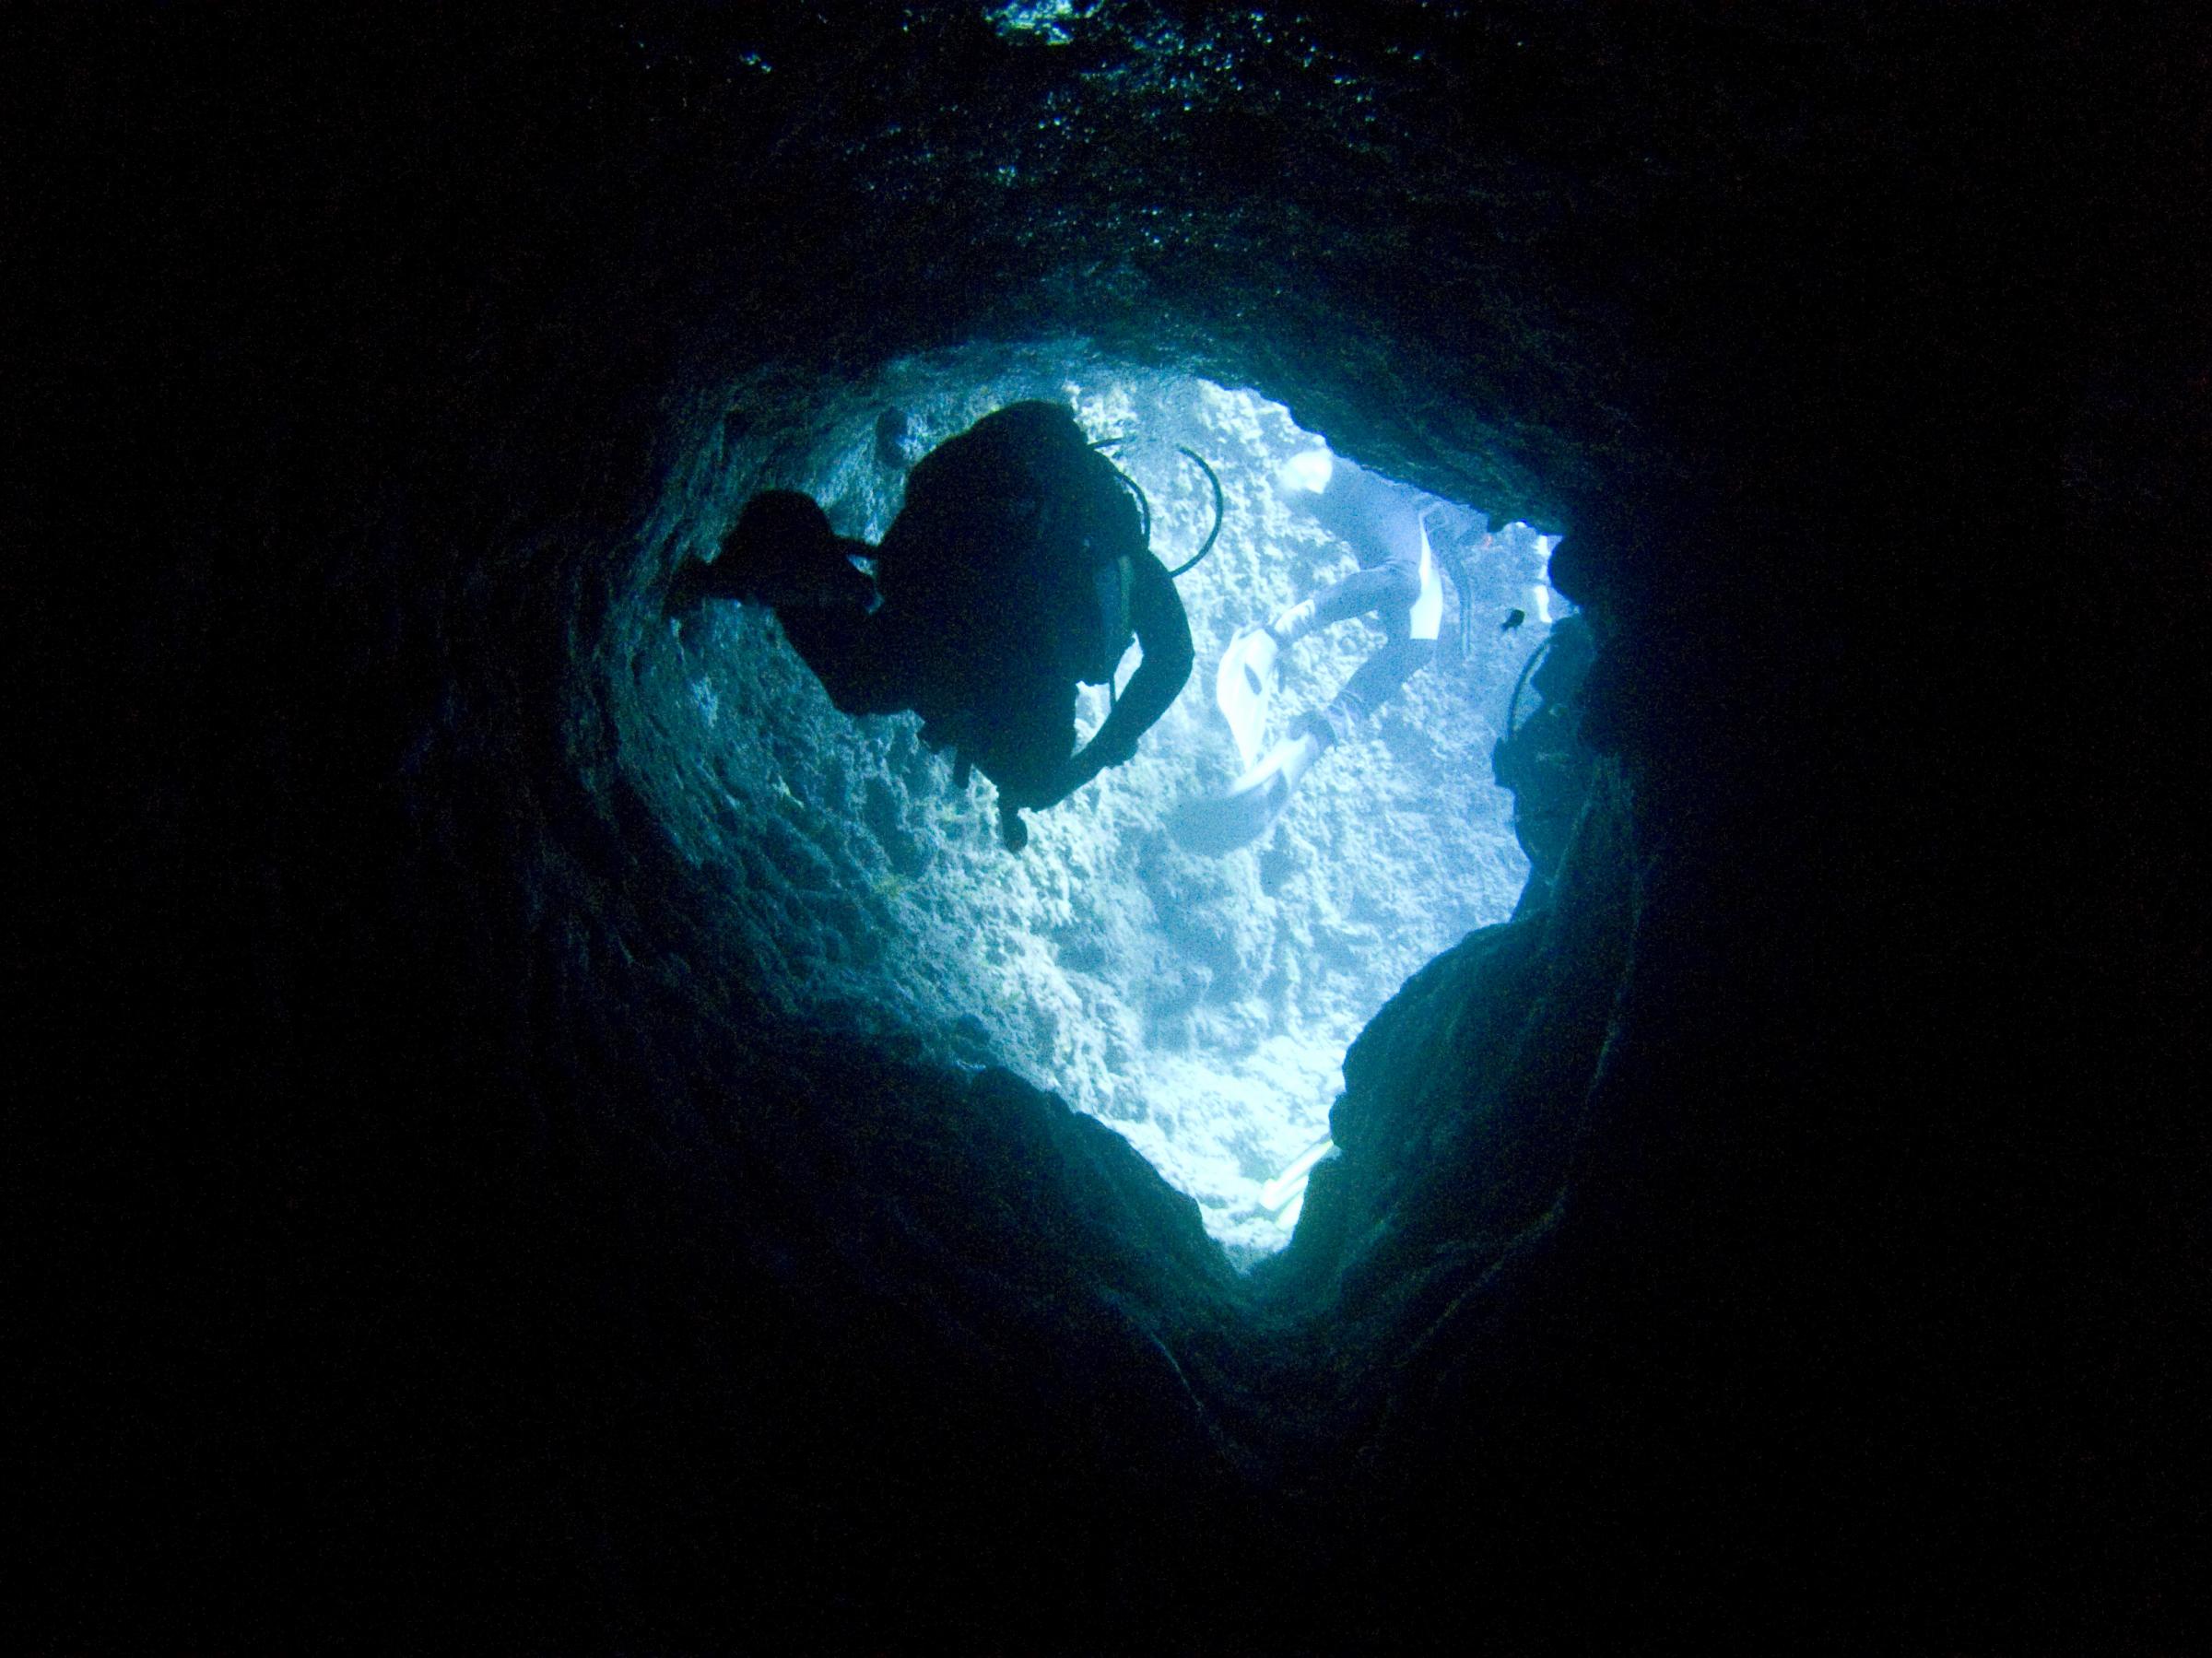 Divers in one of the tunnels on the reef